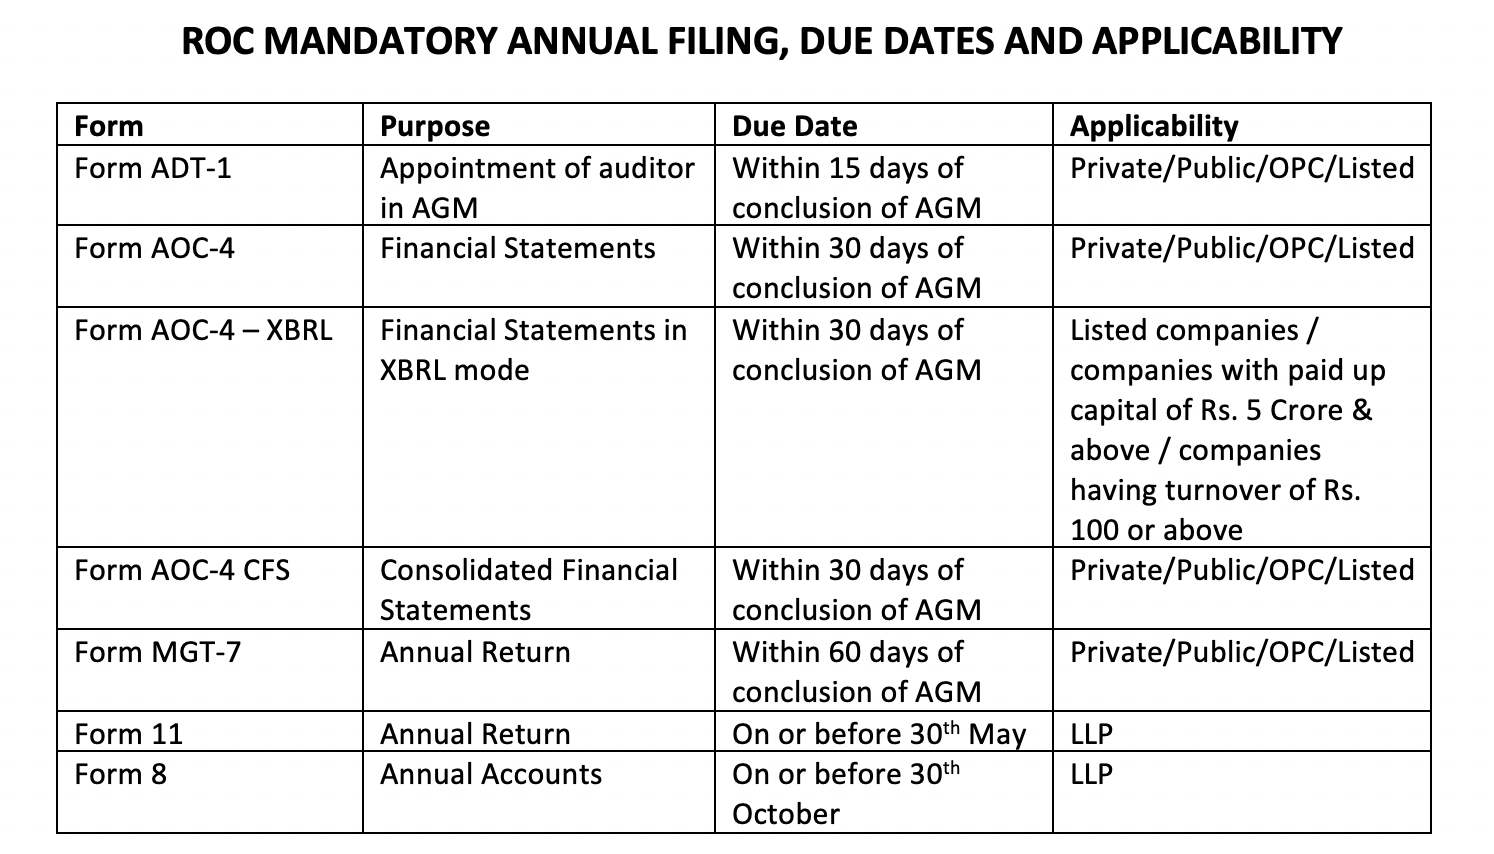 ROC Annual Filing of Pvt Ltd, Public Ltd, OPC and LLP - XBRL and Non XBRL Filing